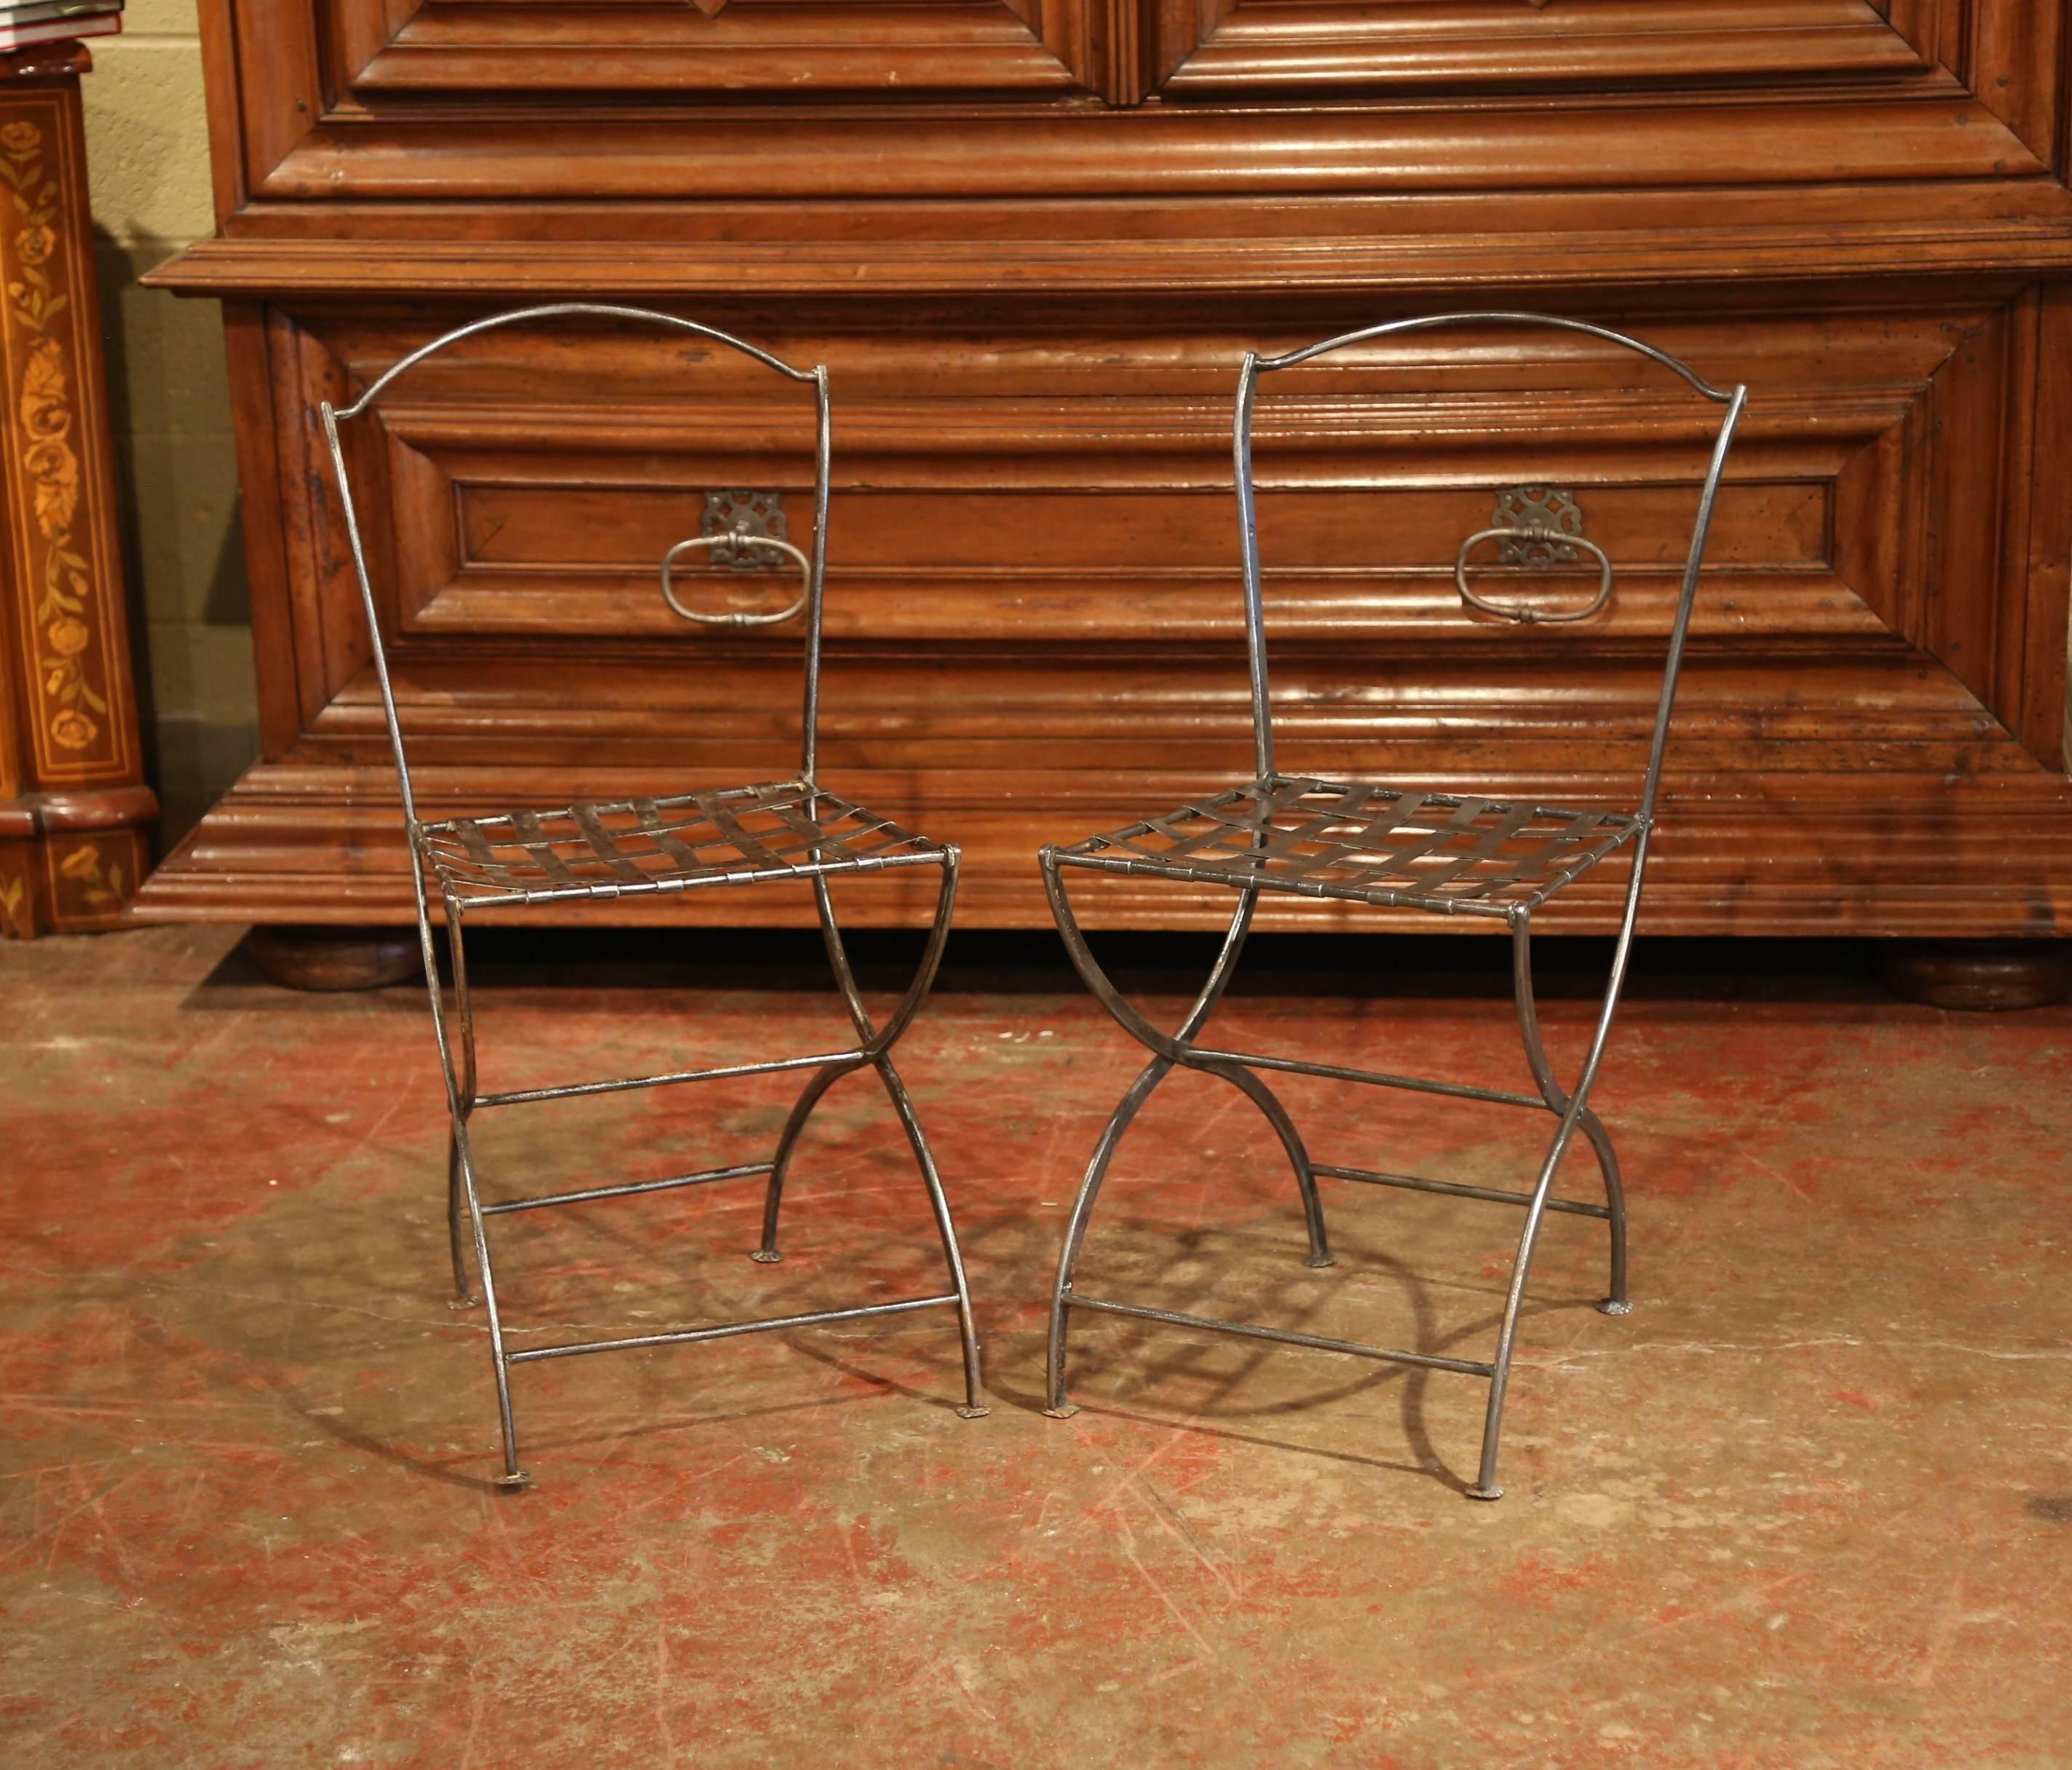 Pair of 19th Century French Polished Iron Bistrot Chairs from Paris 1